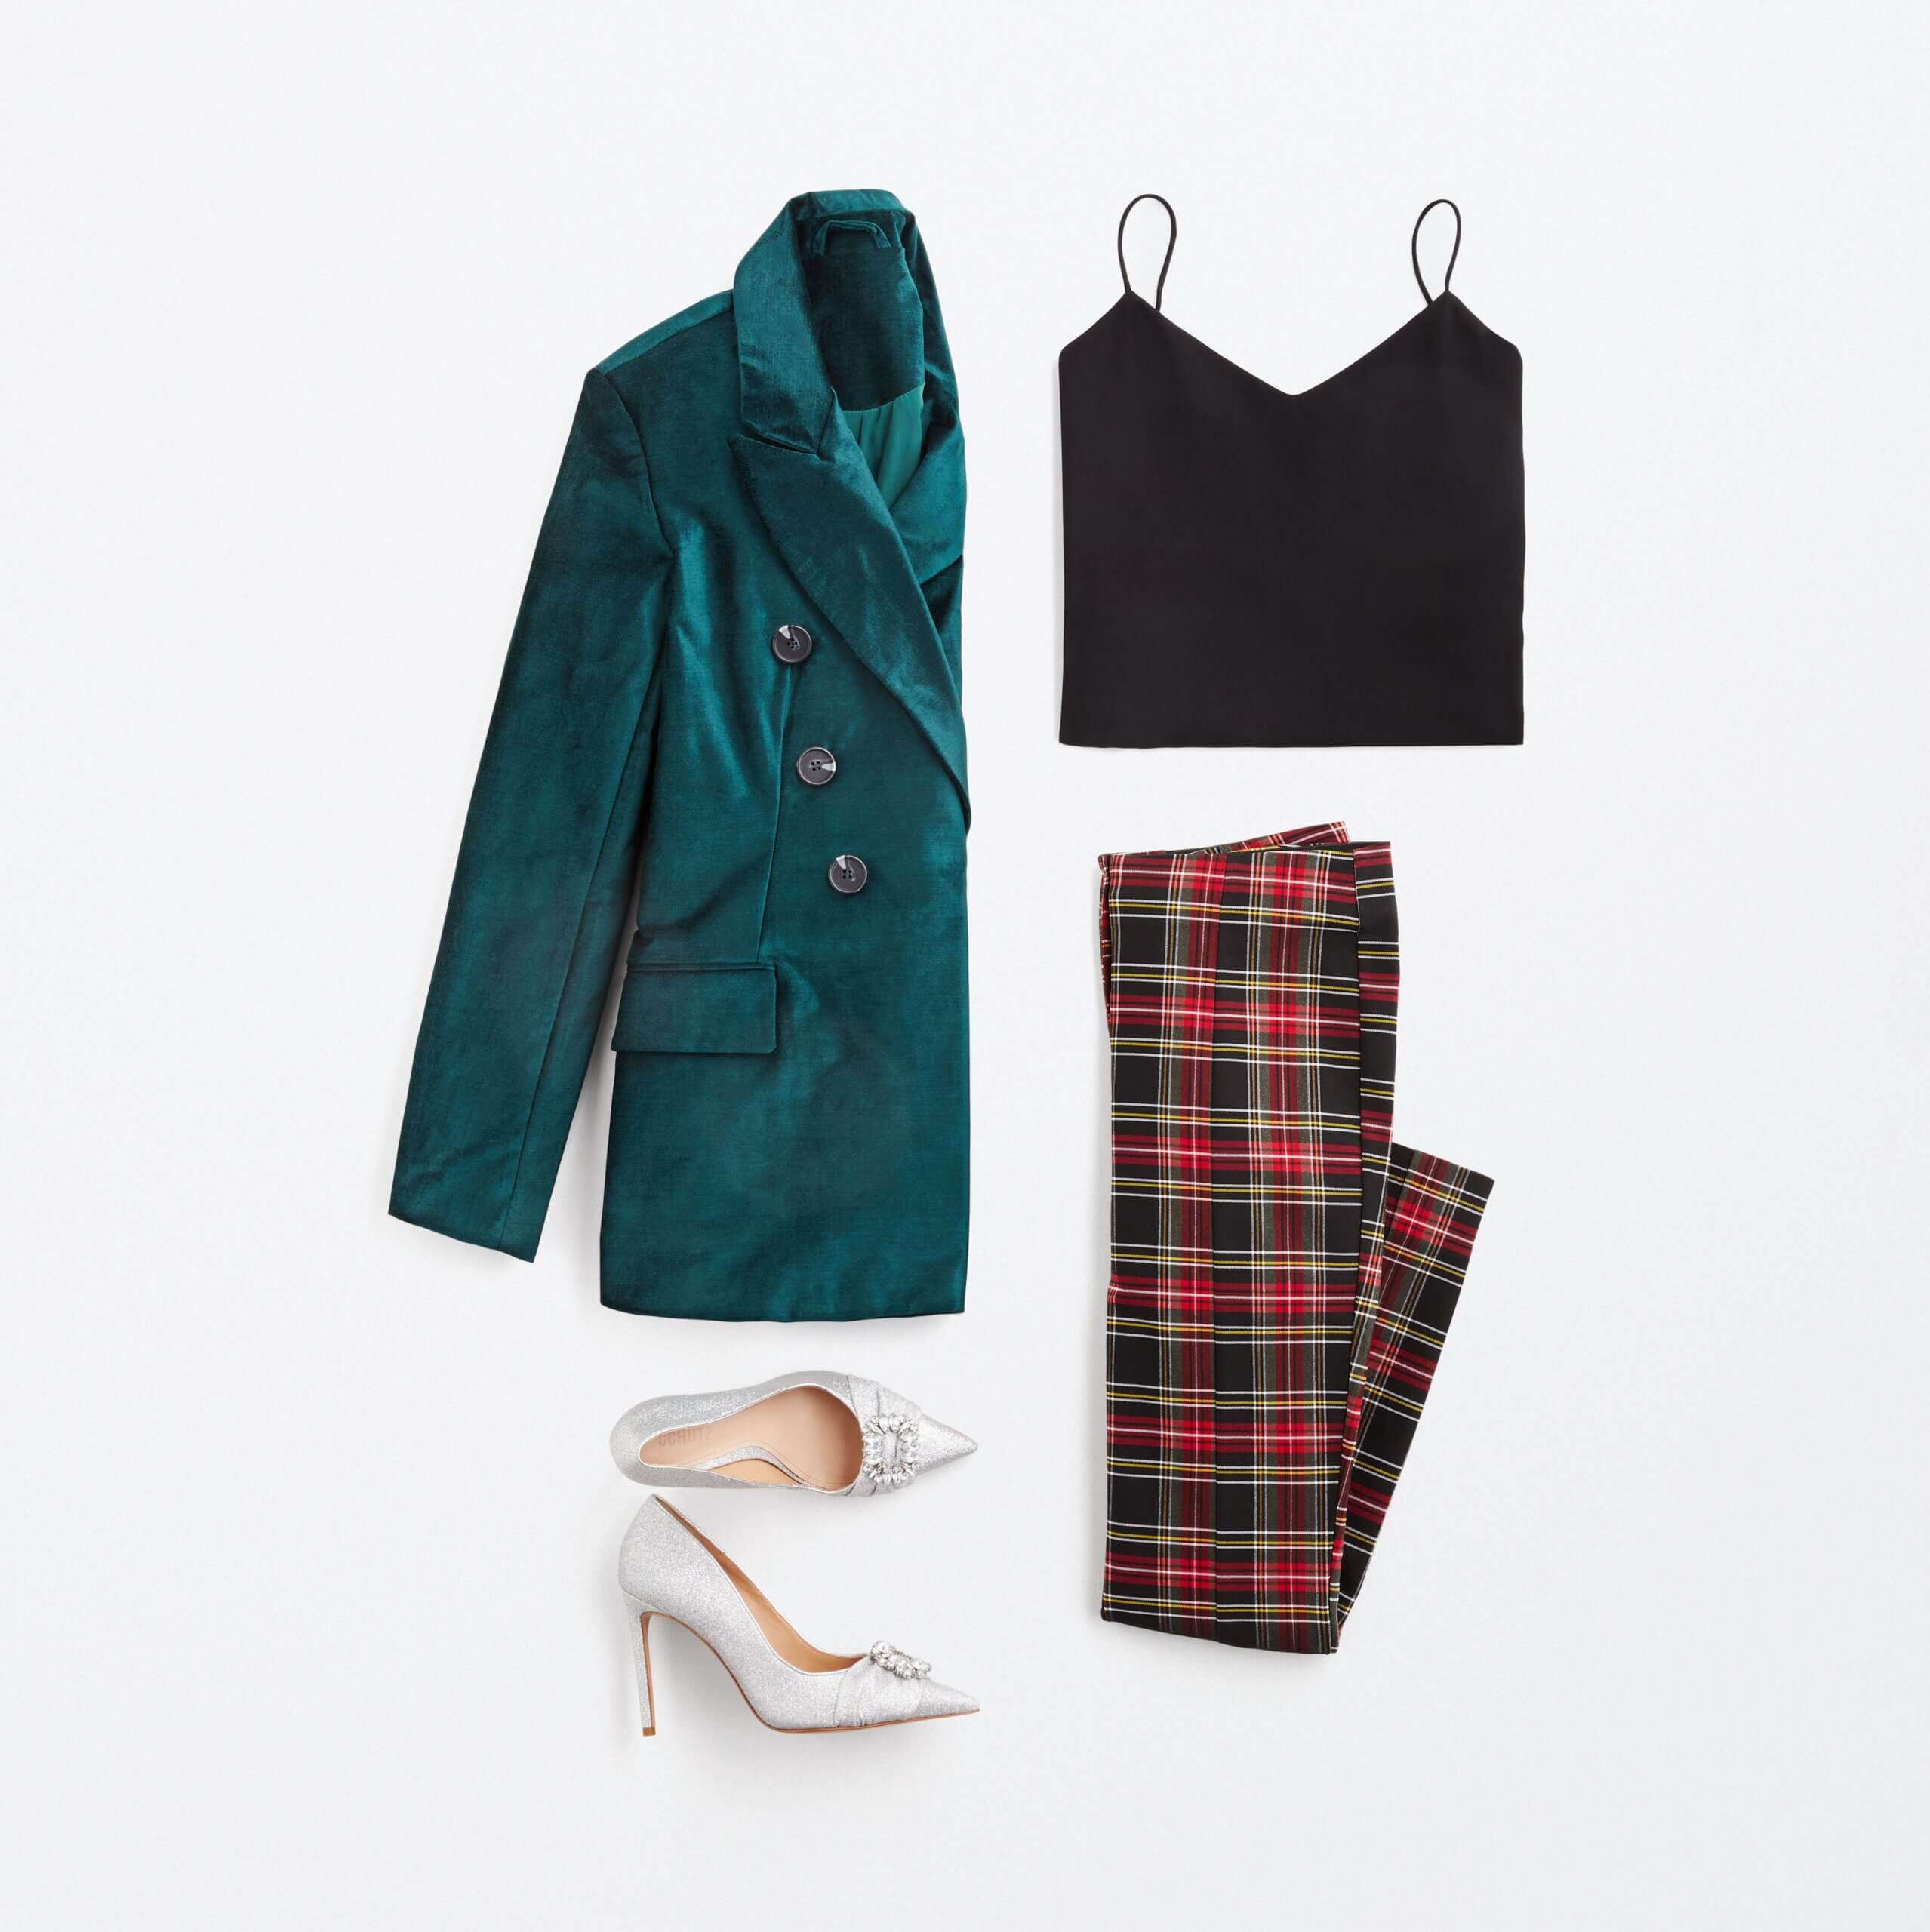 Stitch Fix women's outfit laydown featuring green velvet blazer, black camisole, red and black plaid pants and silver heels. 